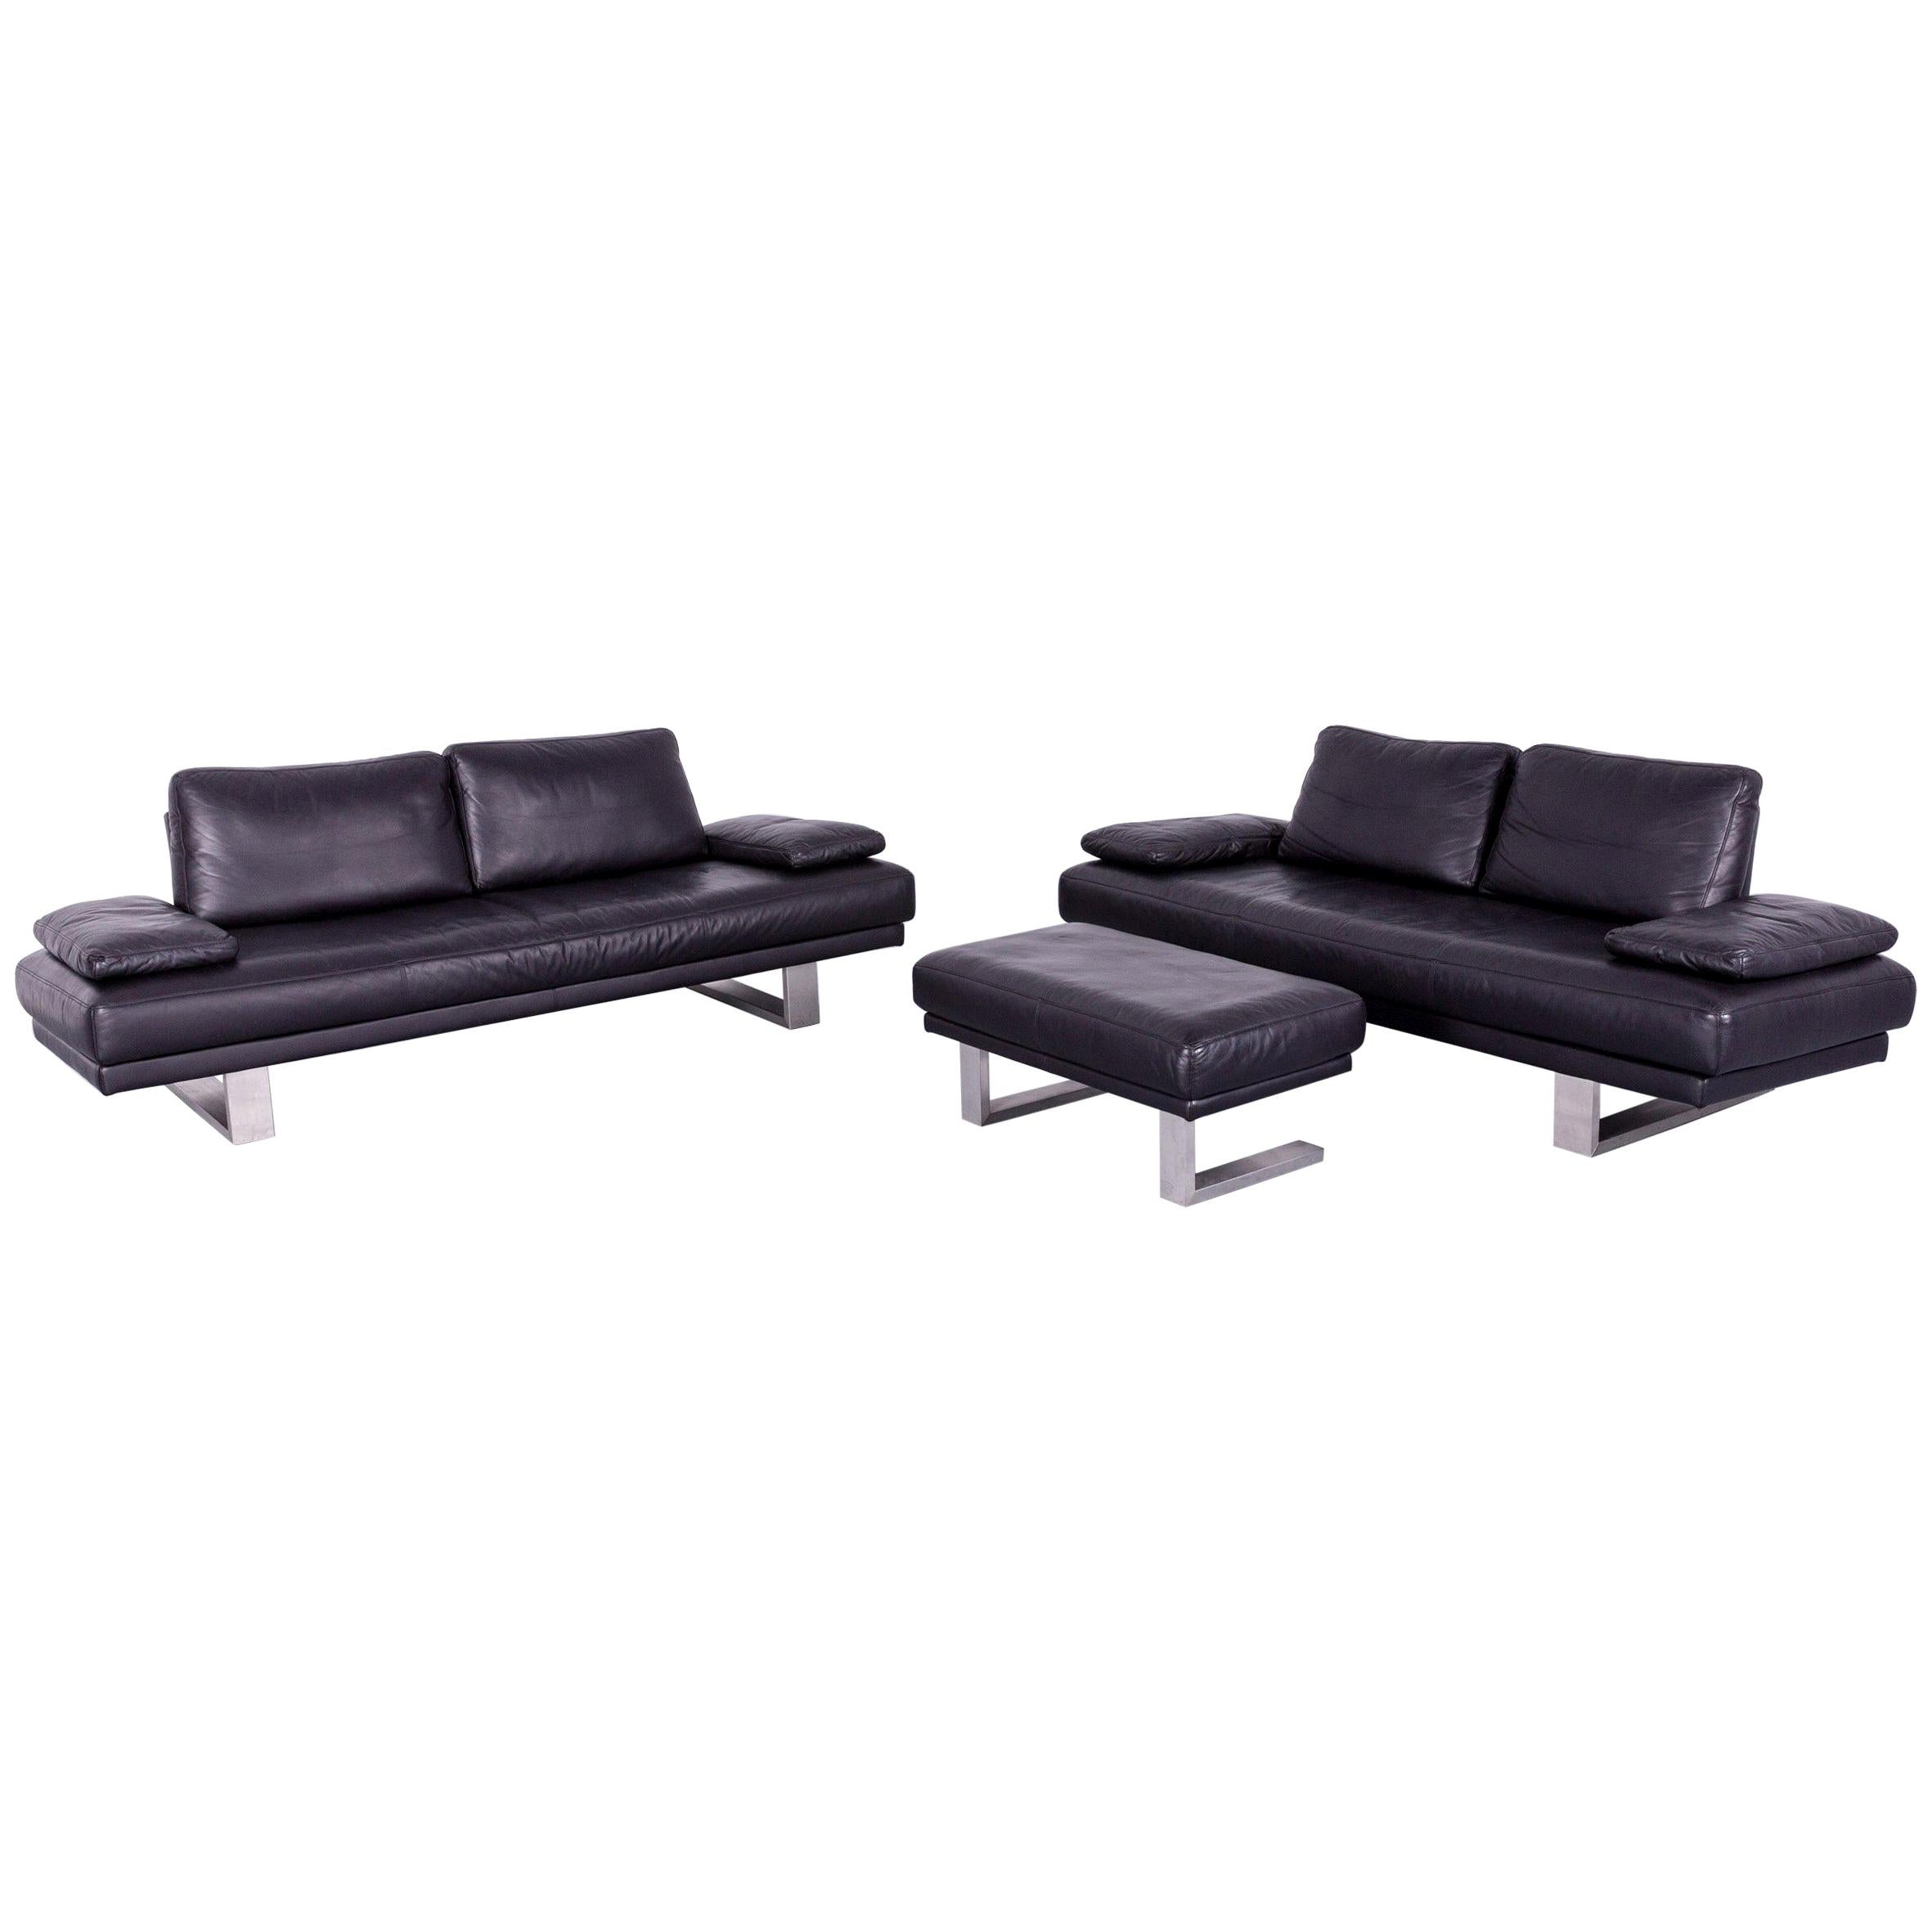 Rolf Benz 6600 Designer Leather Sofa Set with Footstool Black Couch Modern For Sale